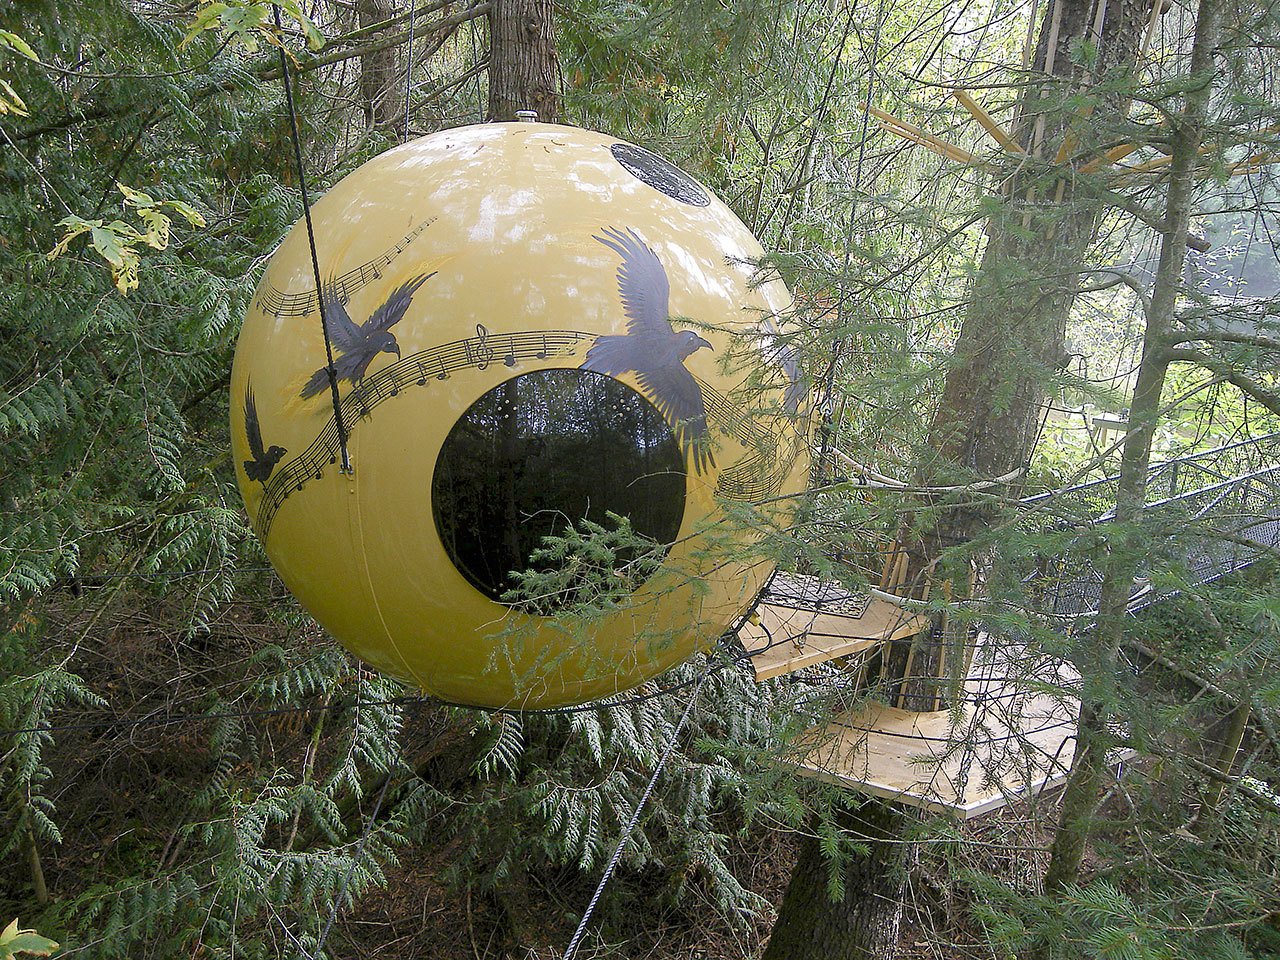 The hotel room sphere named Melody rests in a spruce tree on Vancouver Island in British Columbia. (Photo by Tom Chudleigh)